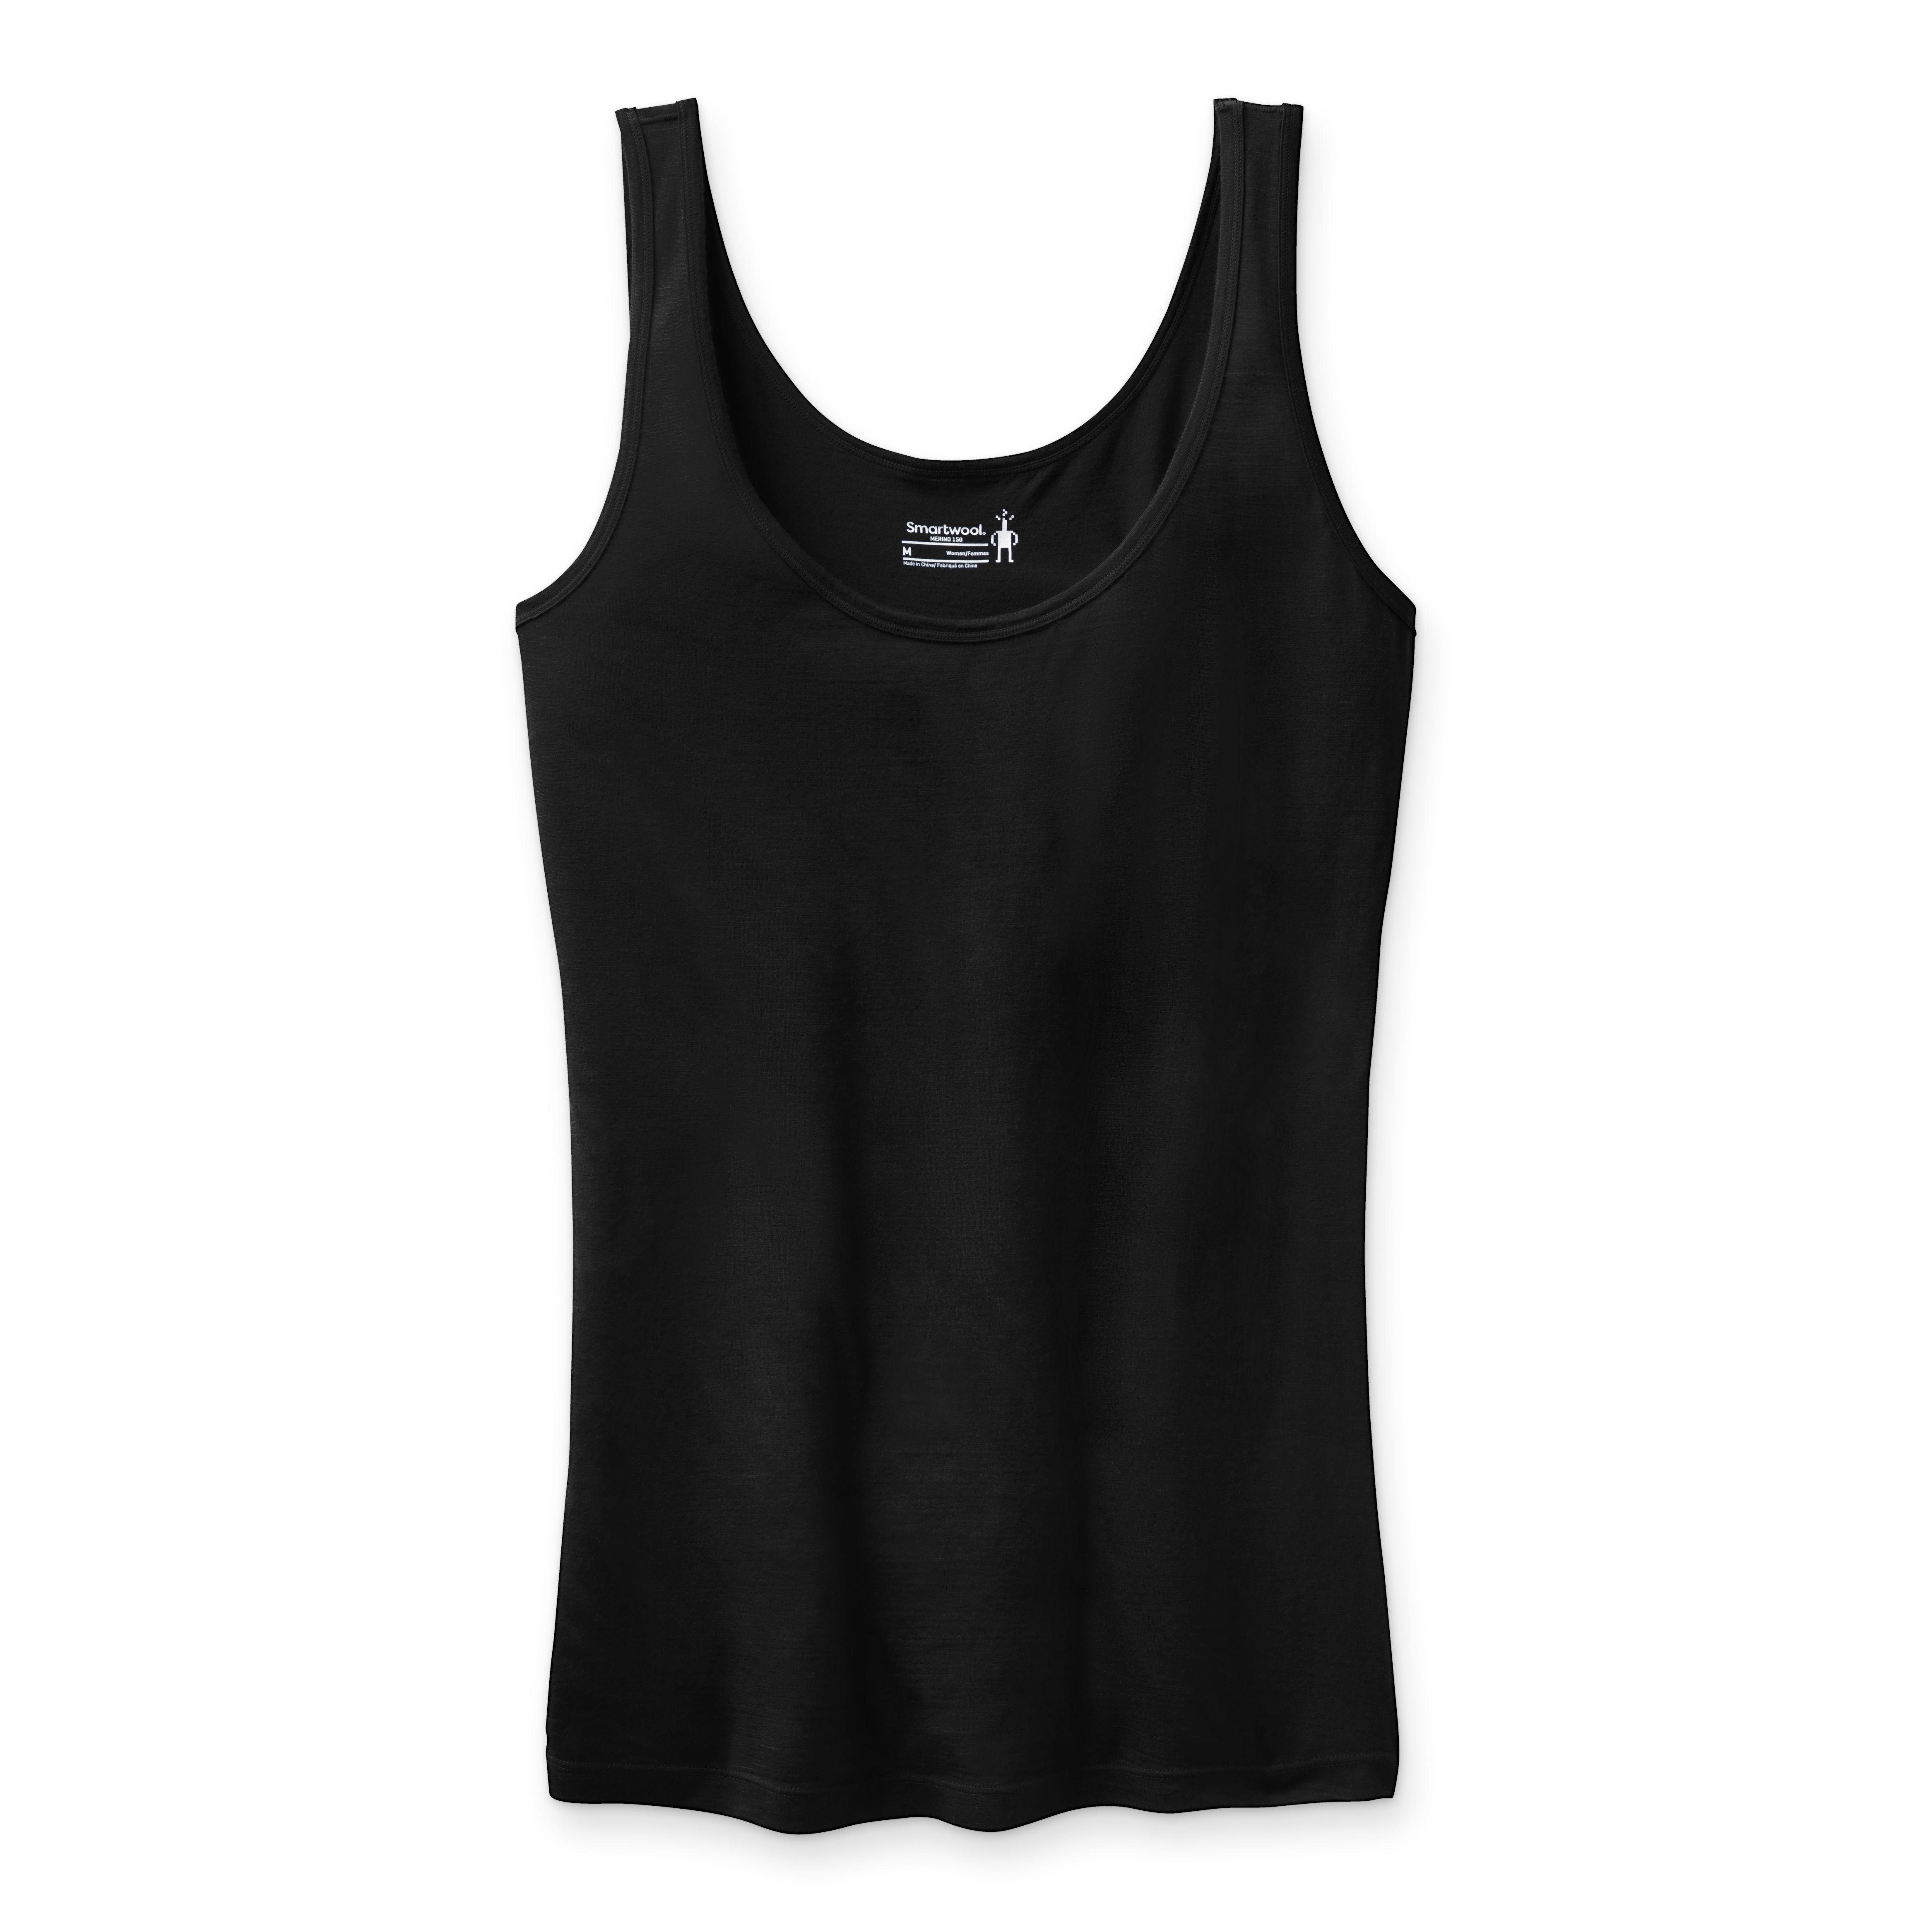 Silence and Noise 100% Viscose Black Tank Top Size XS - 64% off